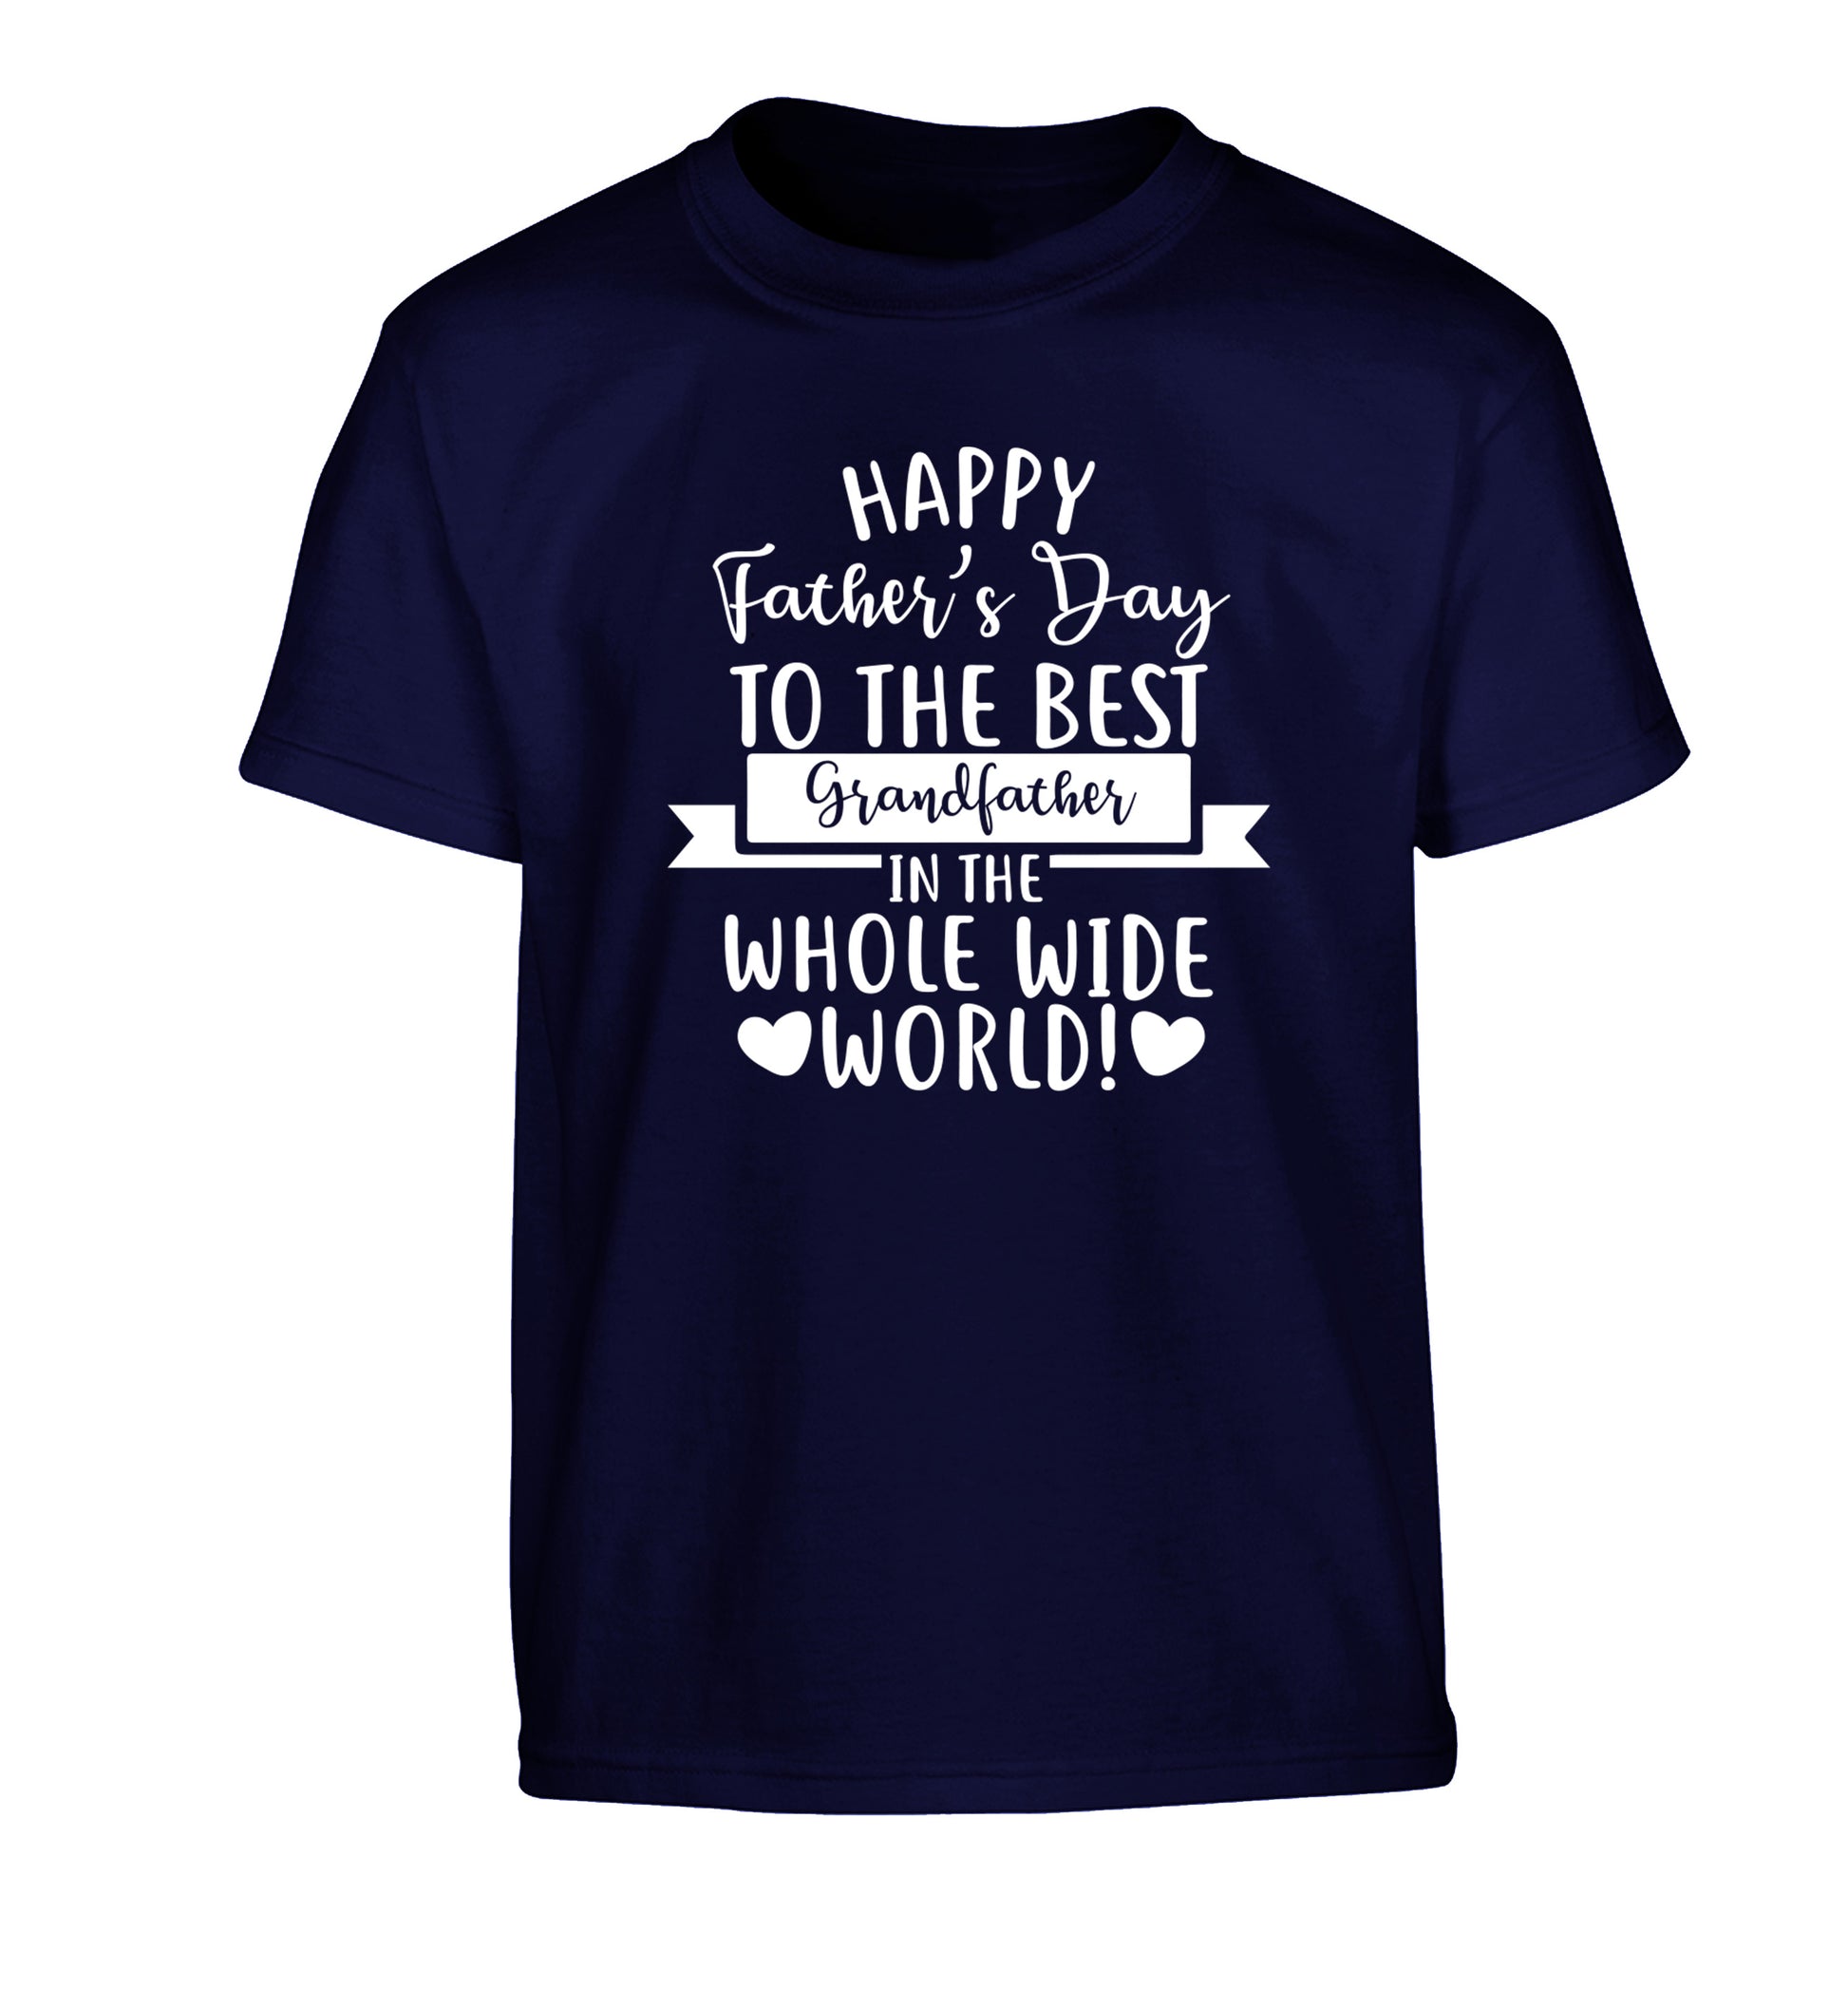 Happy Father's Day to the best grandfather in the world Children's navy Tshirt 12-13 Years